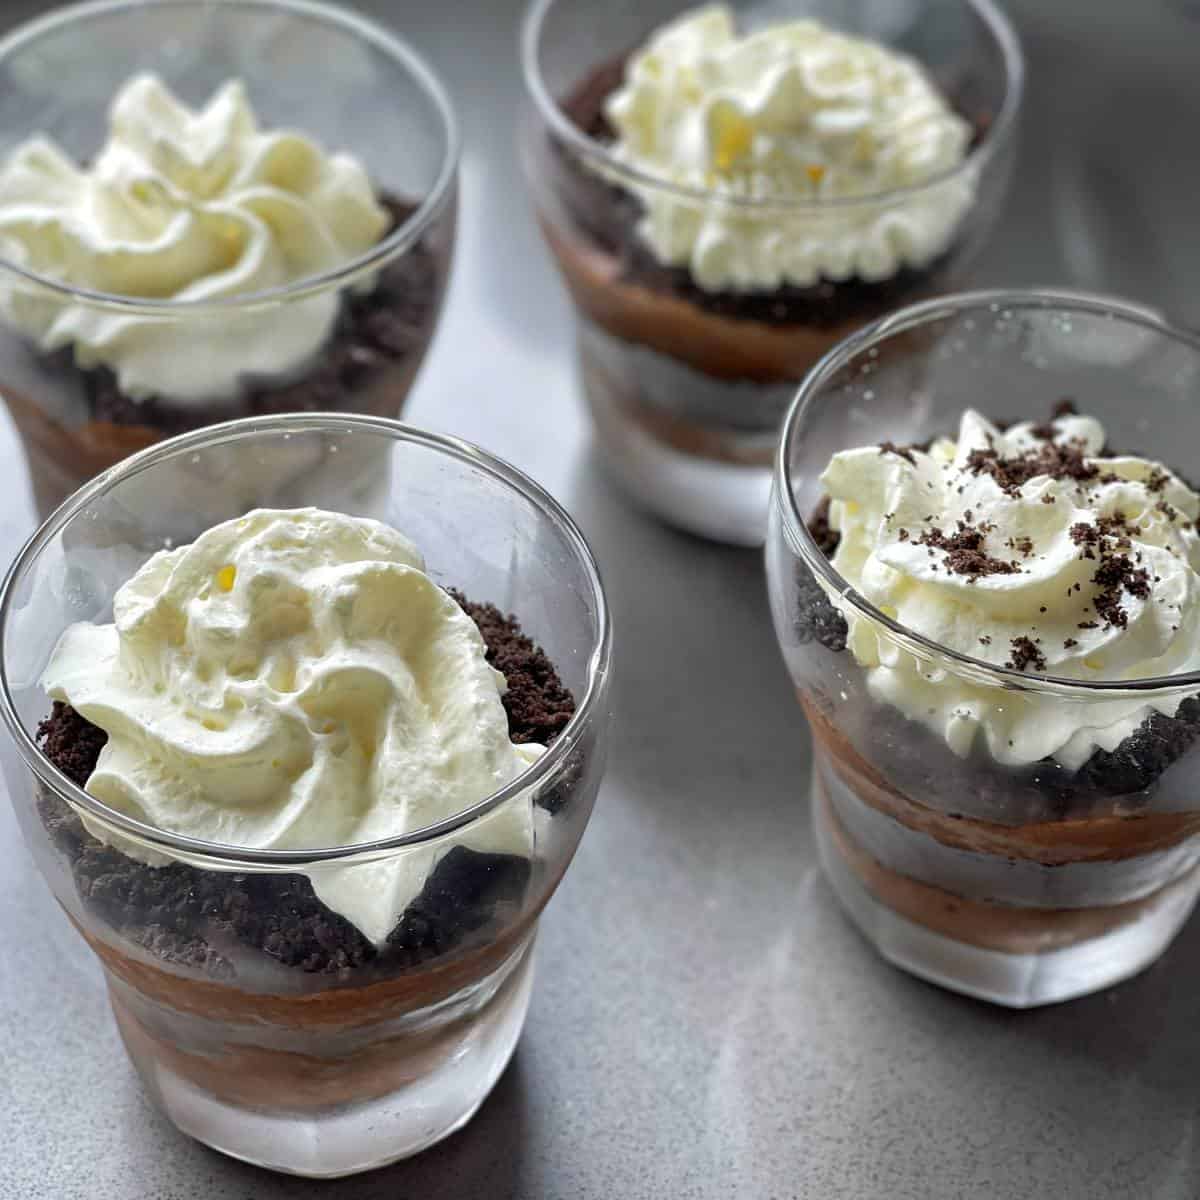 Four Coffee Chocolate Parfaits assembled with whipped cream on top about to be served.